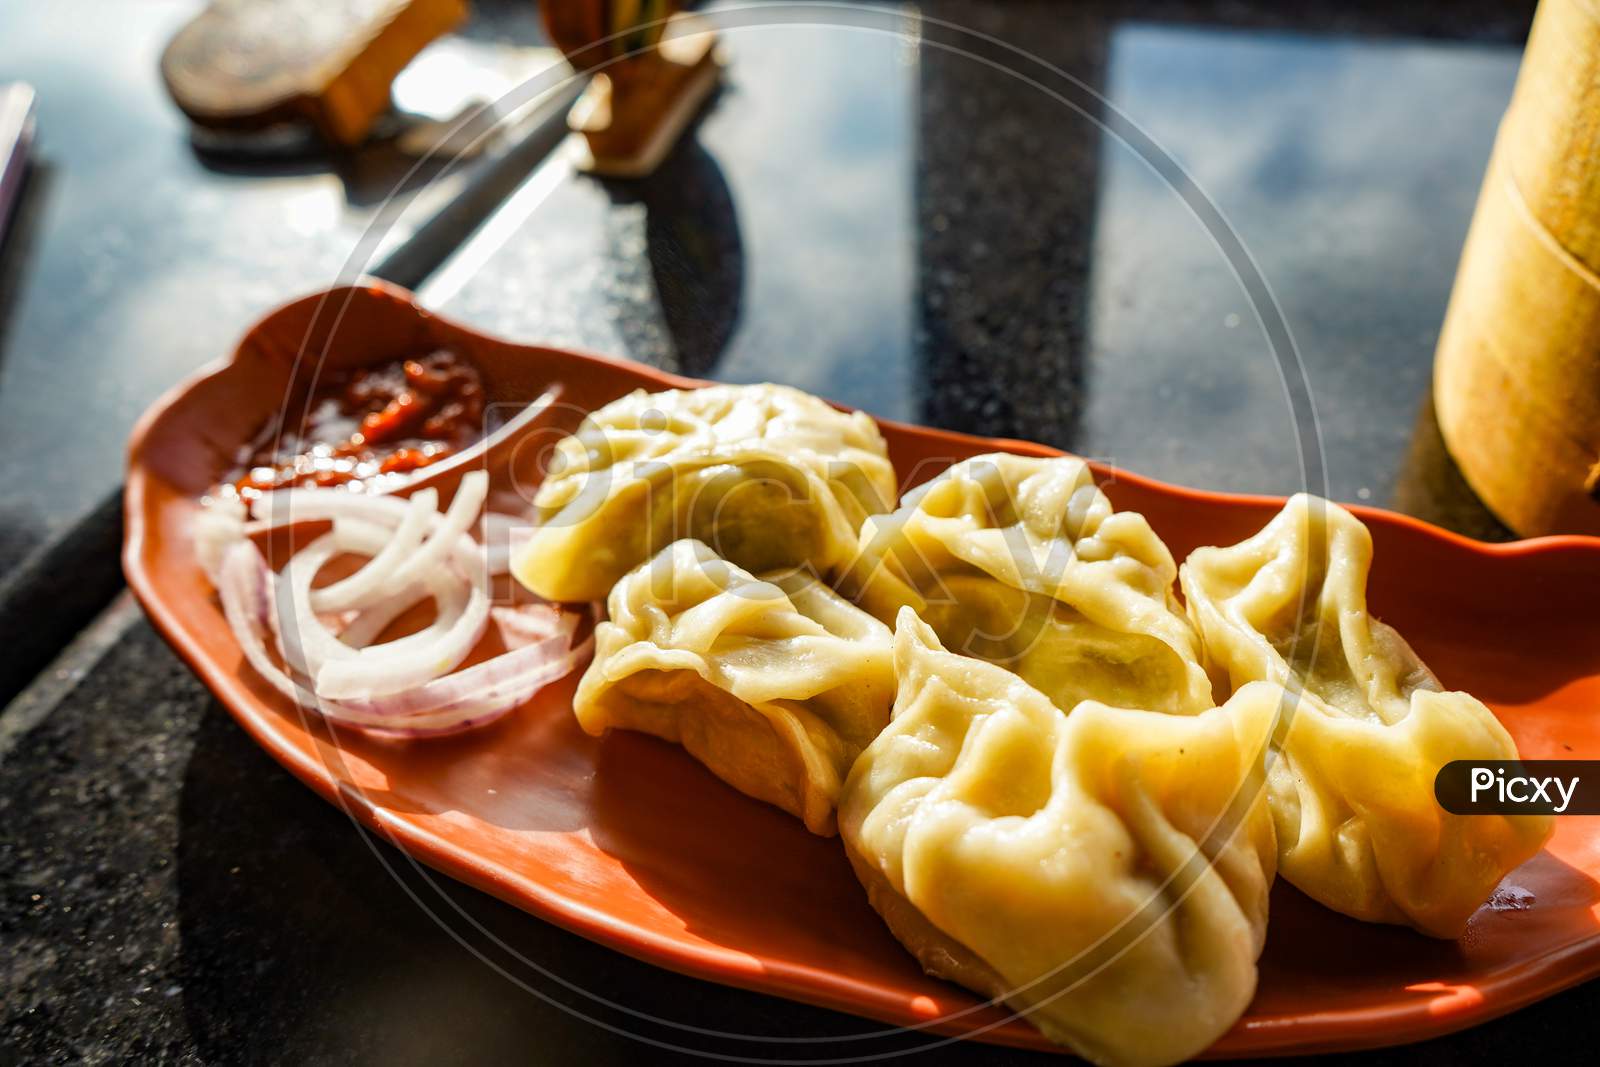 Traditional Dumpling Momos Food From Nepal Served With Tomato Chutney Over Moody Background. Selective Focus